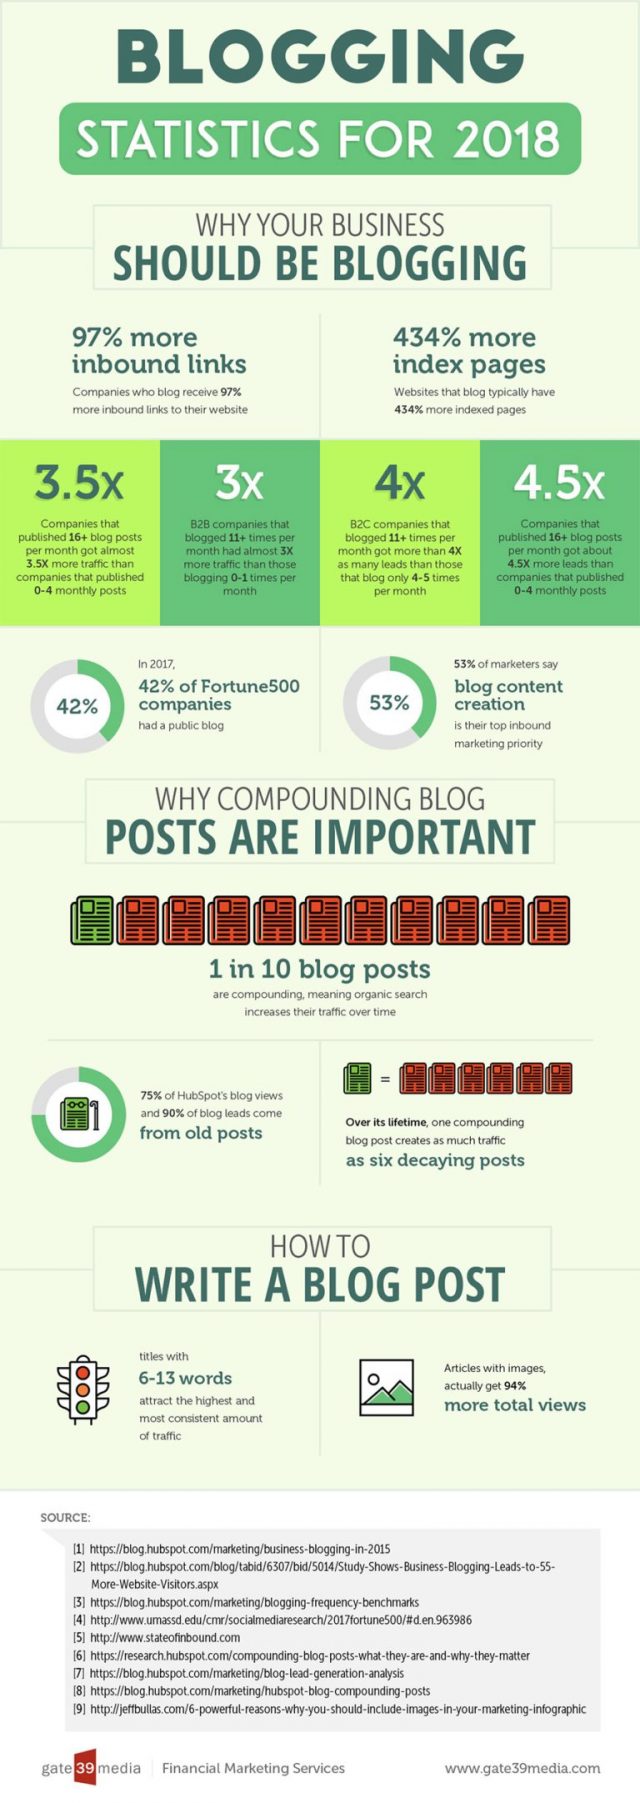 How to Write a Blog Post That Goes Viral In 9 Easy Steps #bloggingtips #blogtips #bloging #blogging #contentmarketing #contentmarketingtips #marketingstrategy #infographic #bloggingstatistics #bloggingforbeginners #blogtraffic #contentcreation